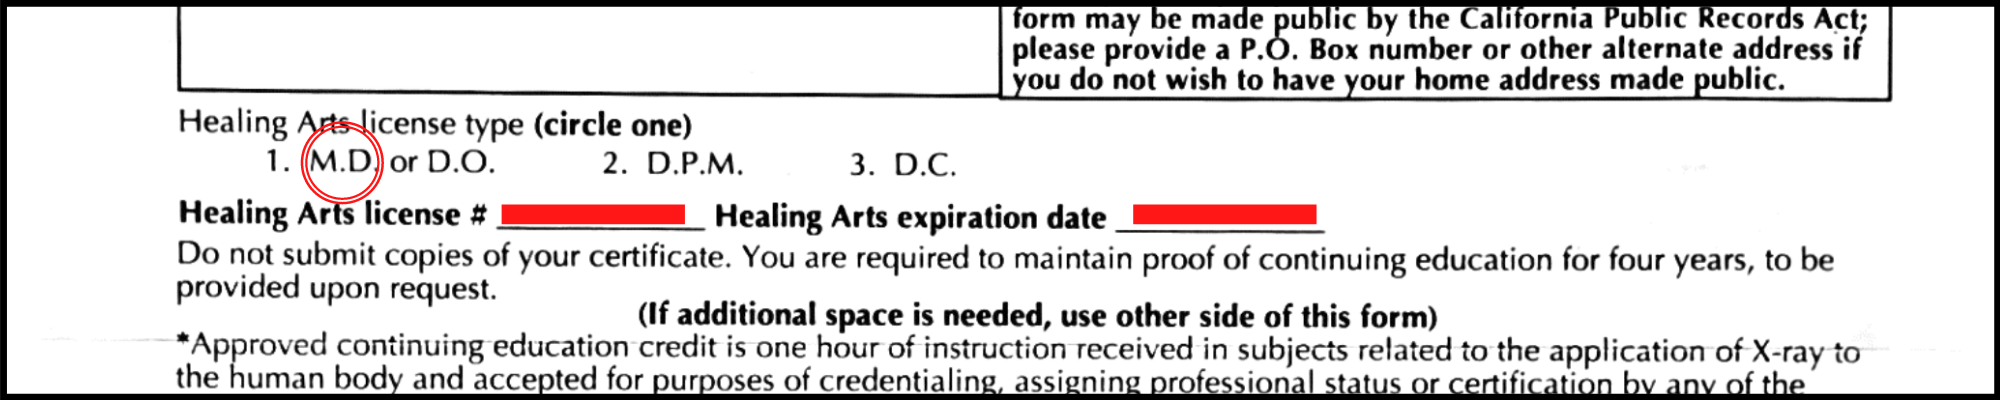 License type "M.D." is circled in red and 2 red boxes indicated where you need to write your license number and expiration date